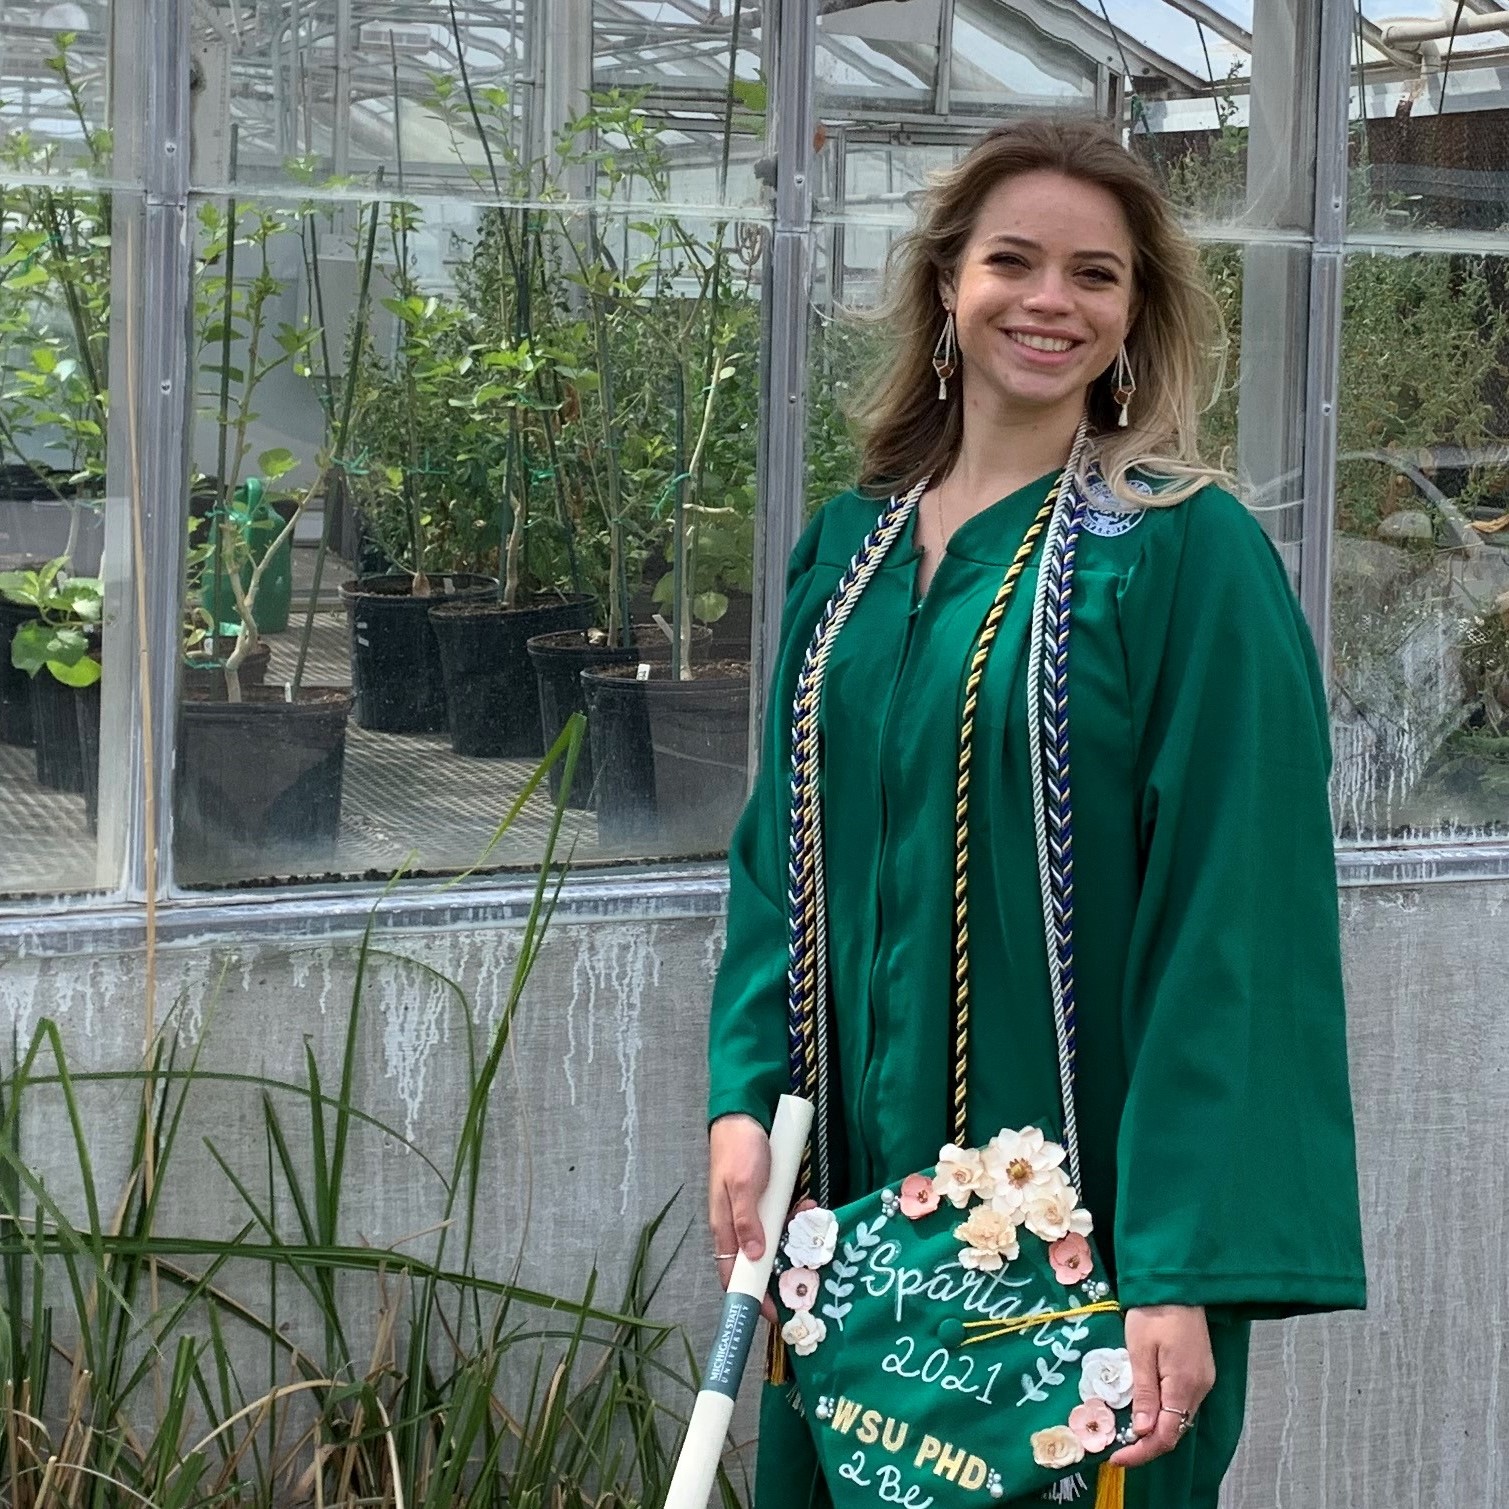 Kaylie Barton in her graduation gown outside of a greenhouse